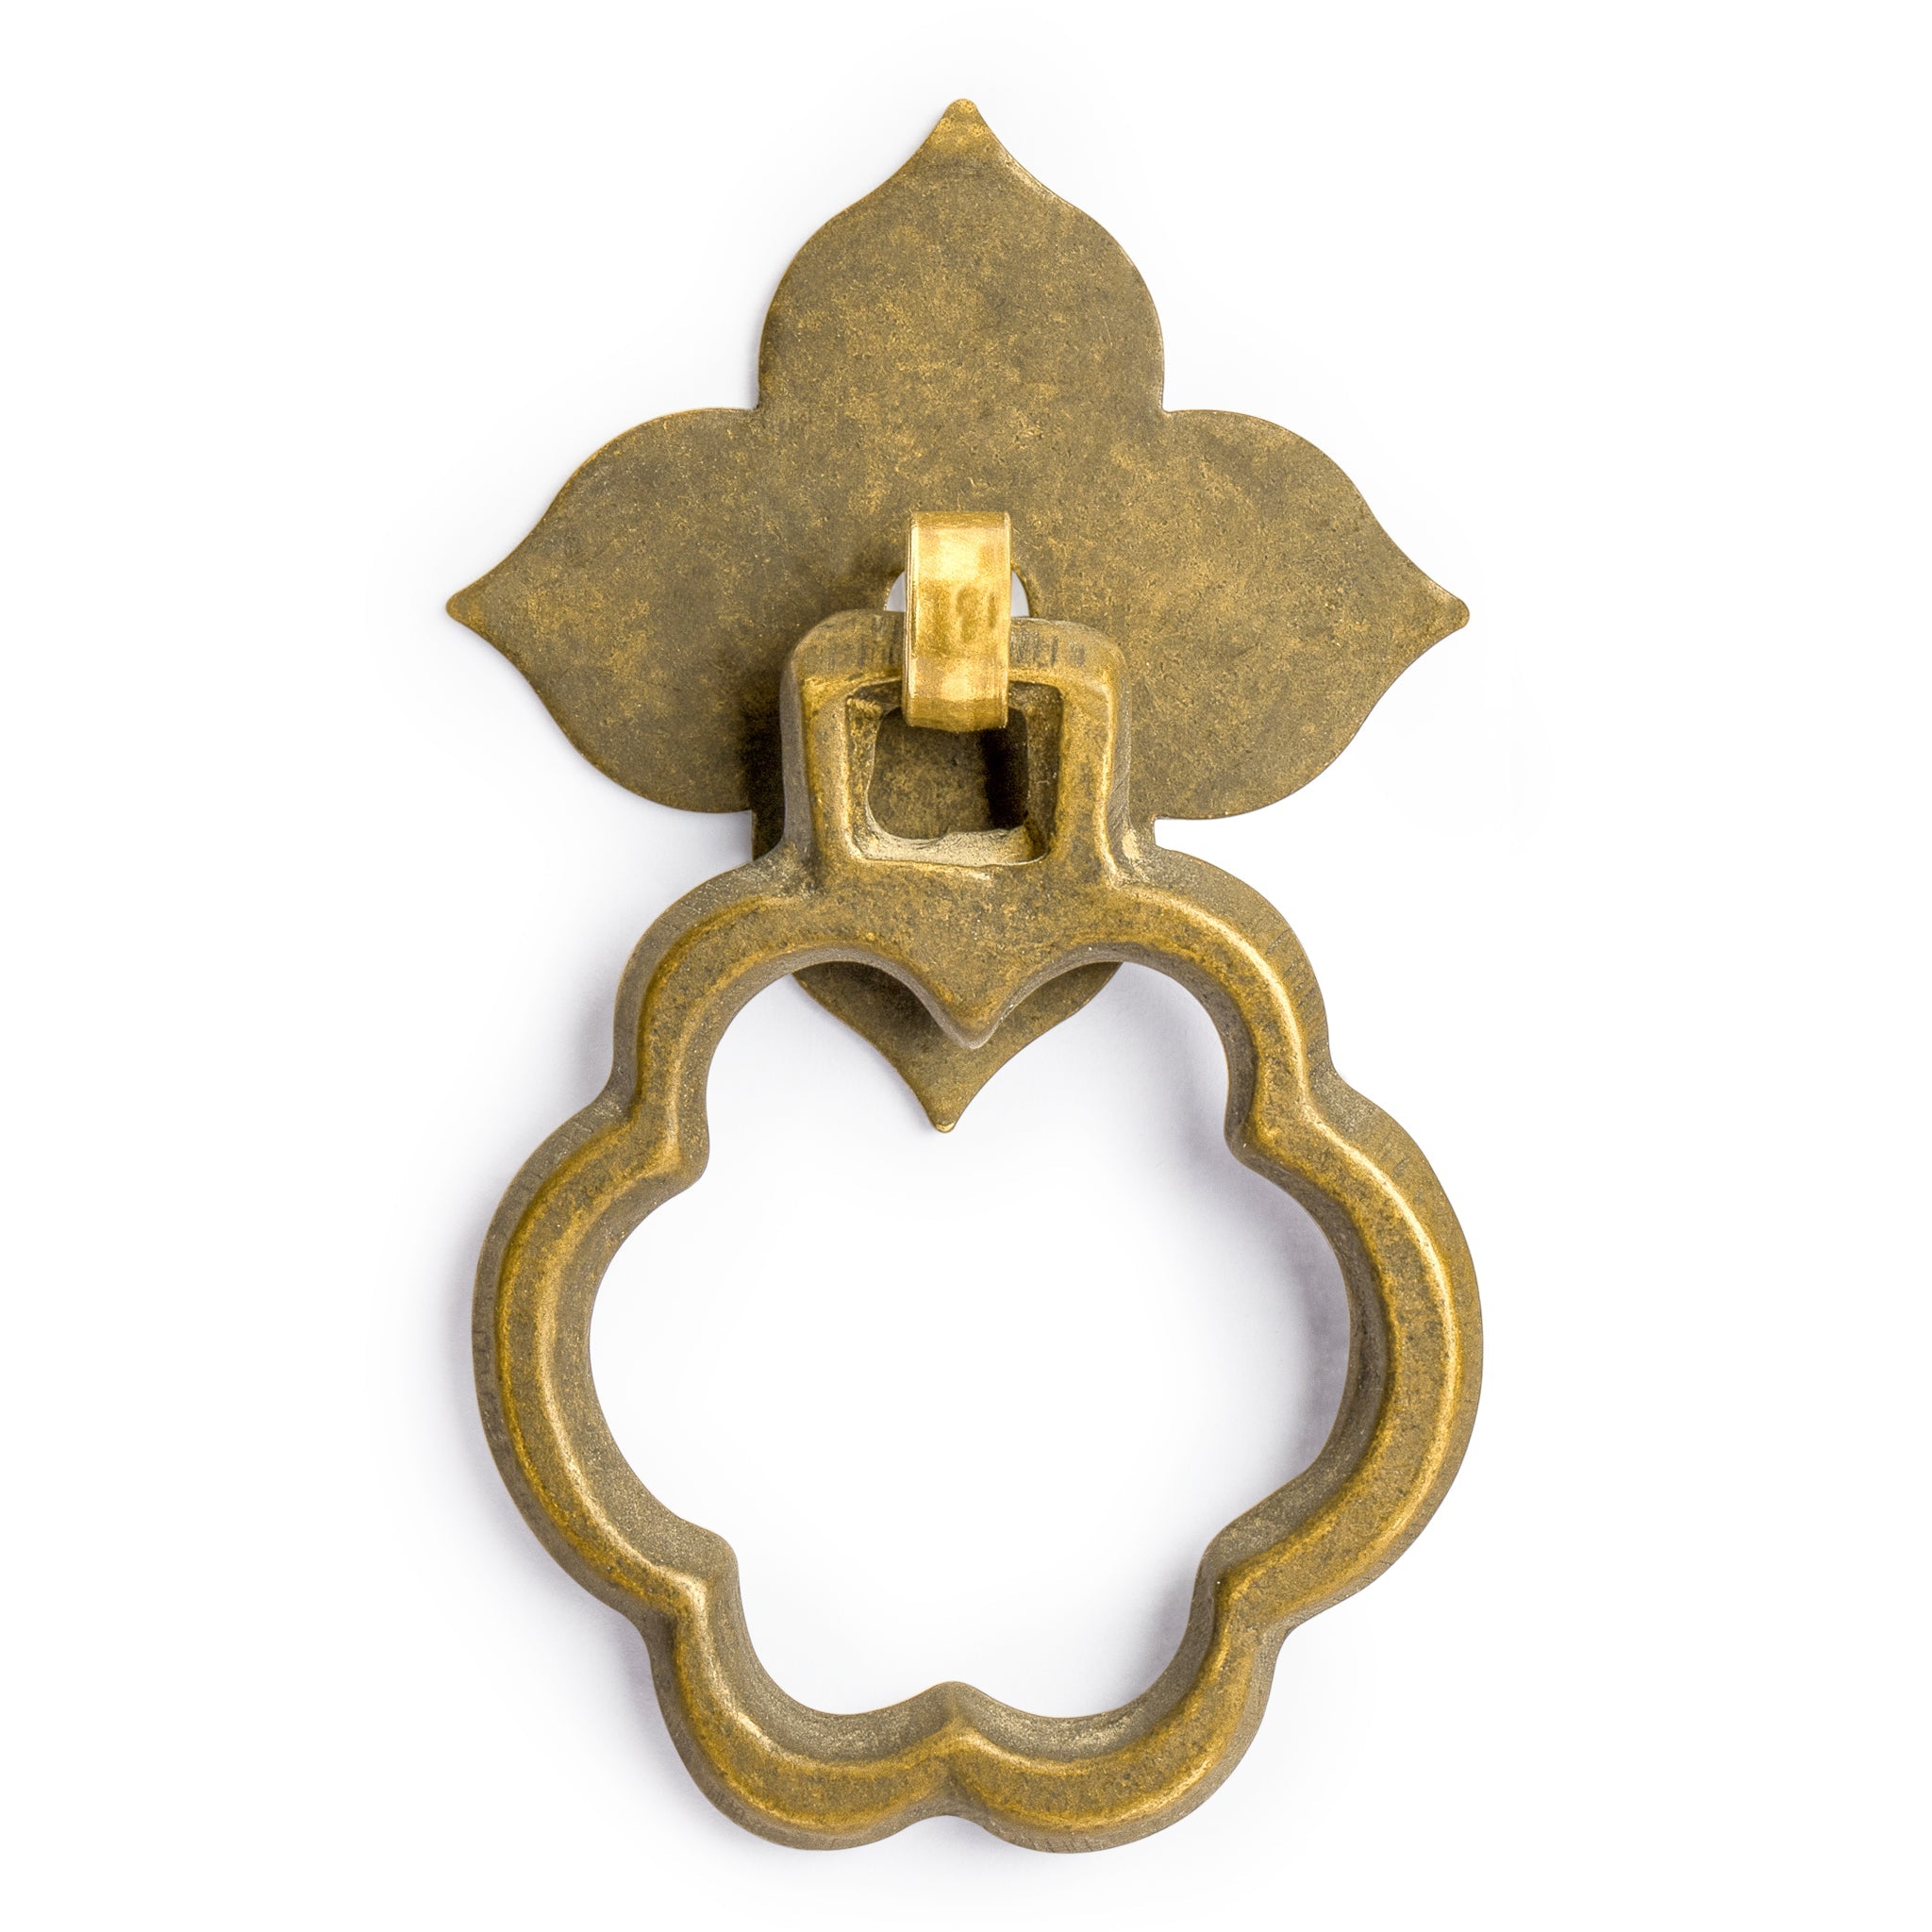 Bunchberry and Clover Flower Pulls 2" - Set of 2-Chinese Brass Hardware